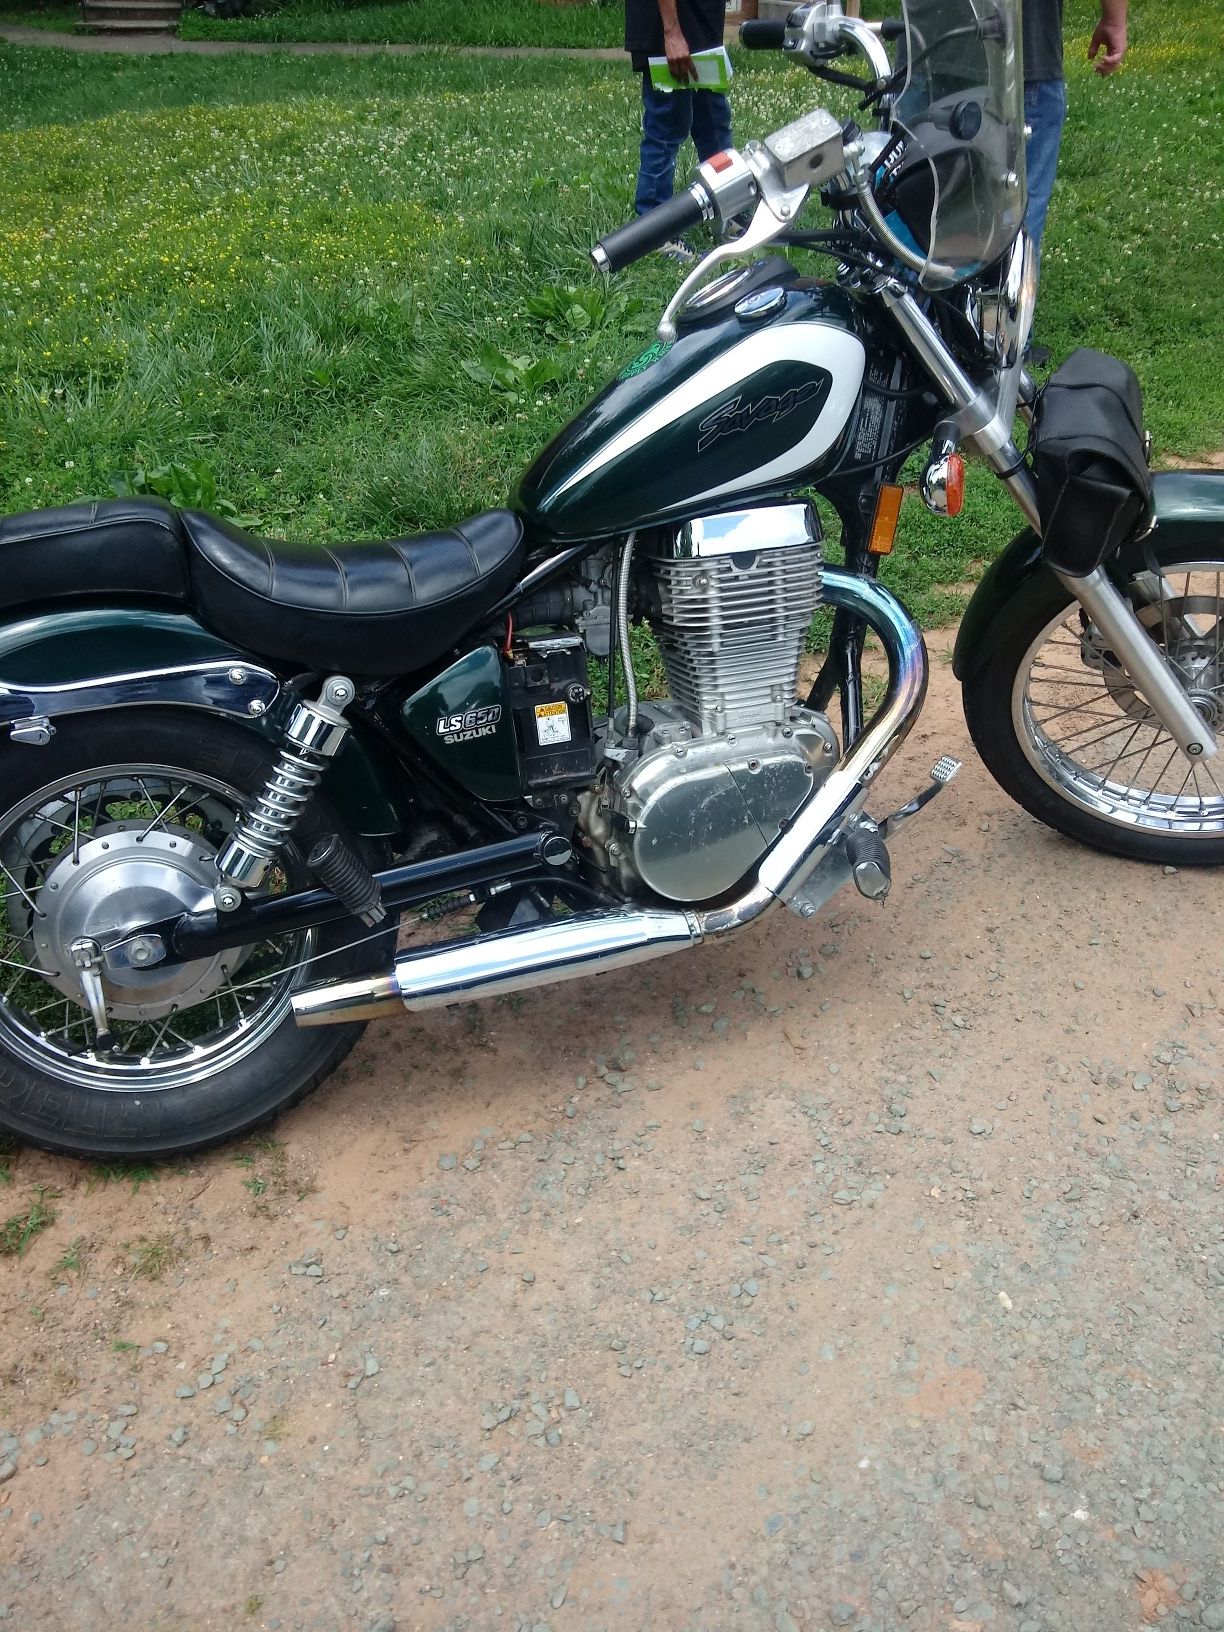 Photo Have a 2000 Suzuki 650 motorcycle for sale 1 great $1,500 or best offer